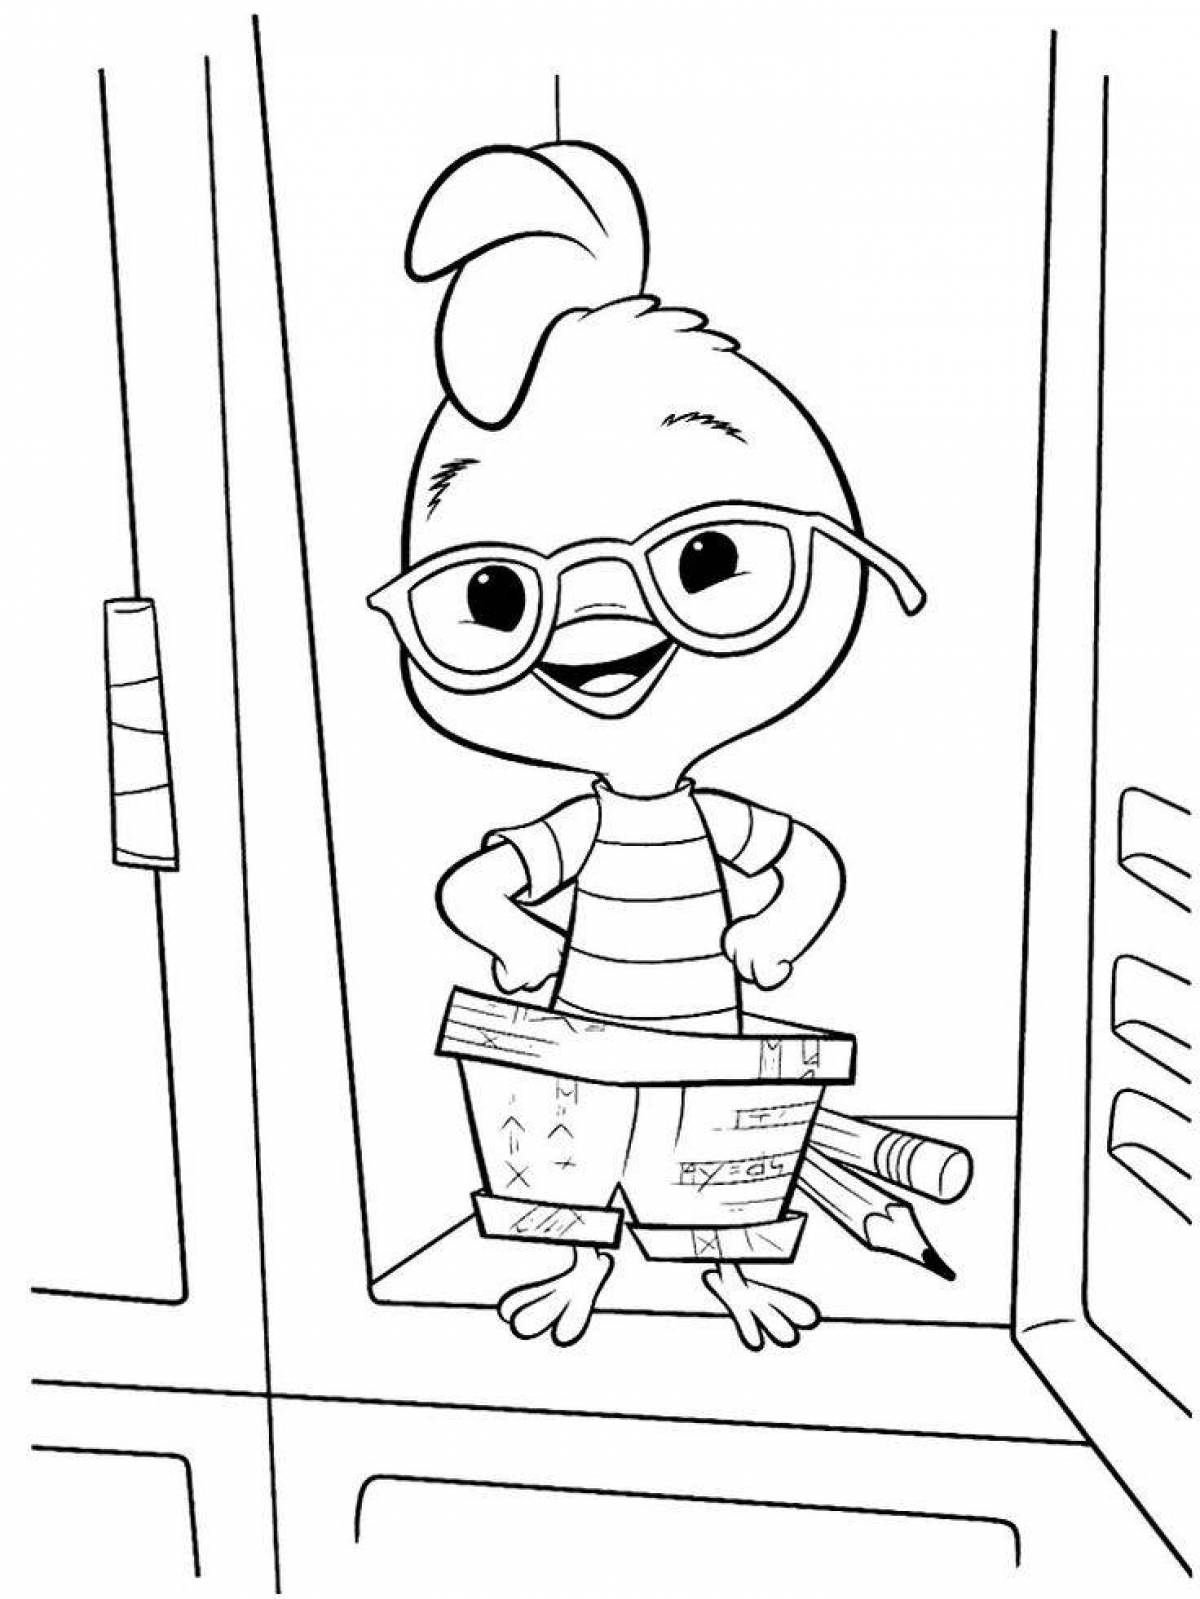 Adorable chick coloring book